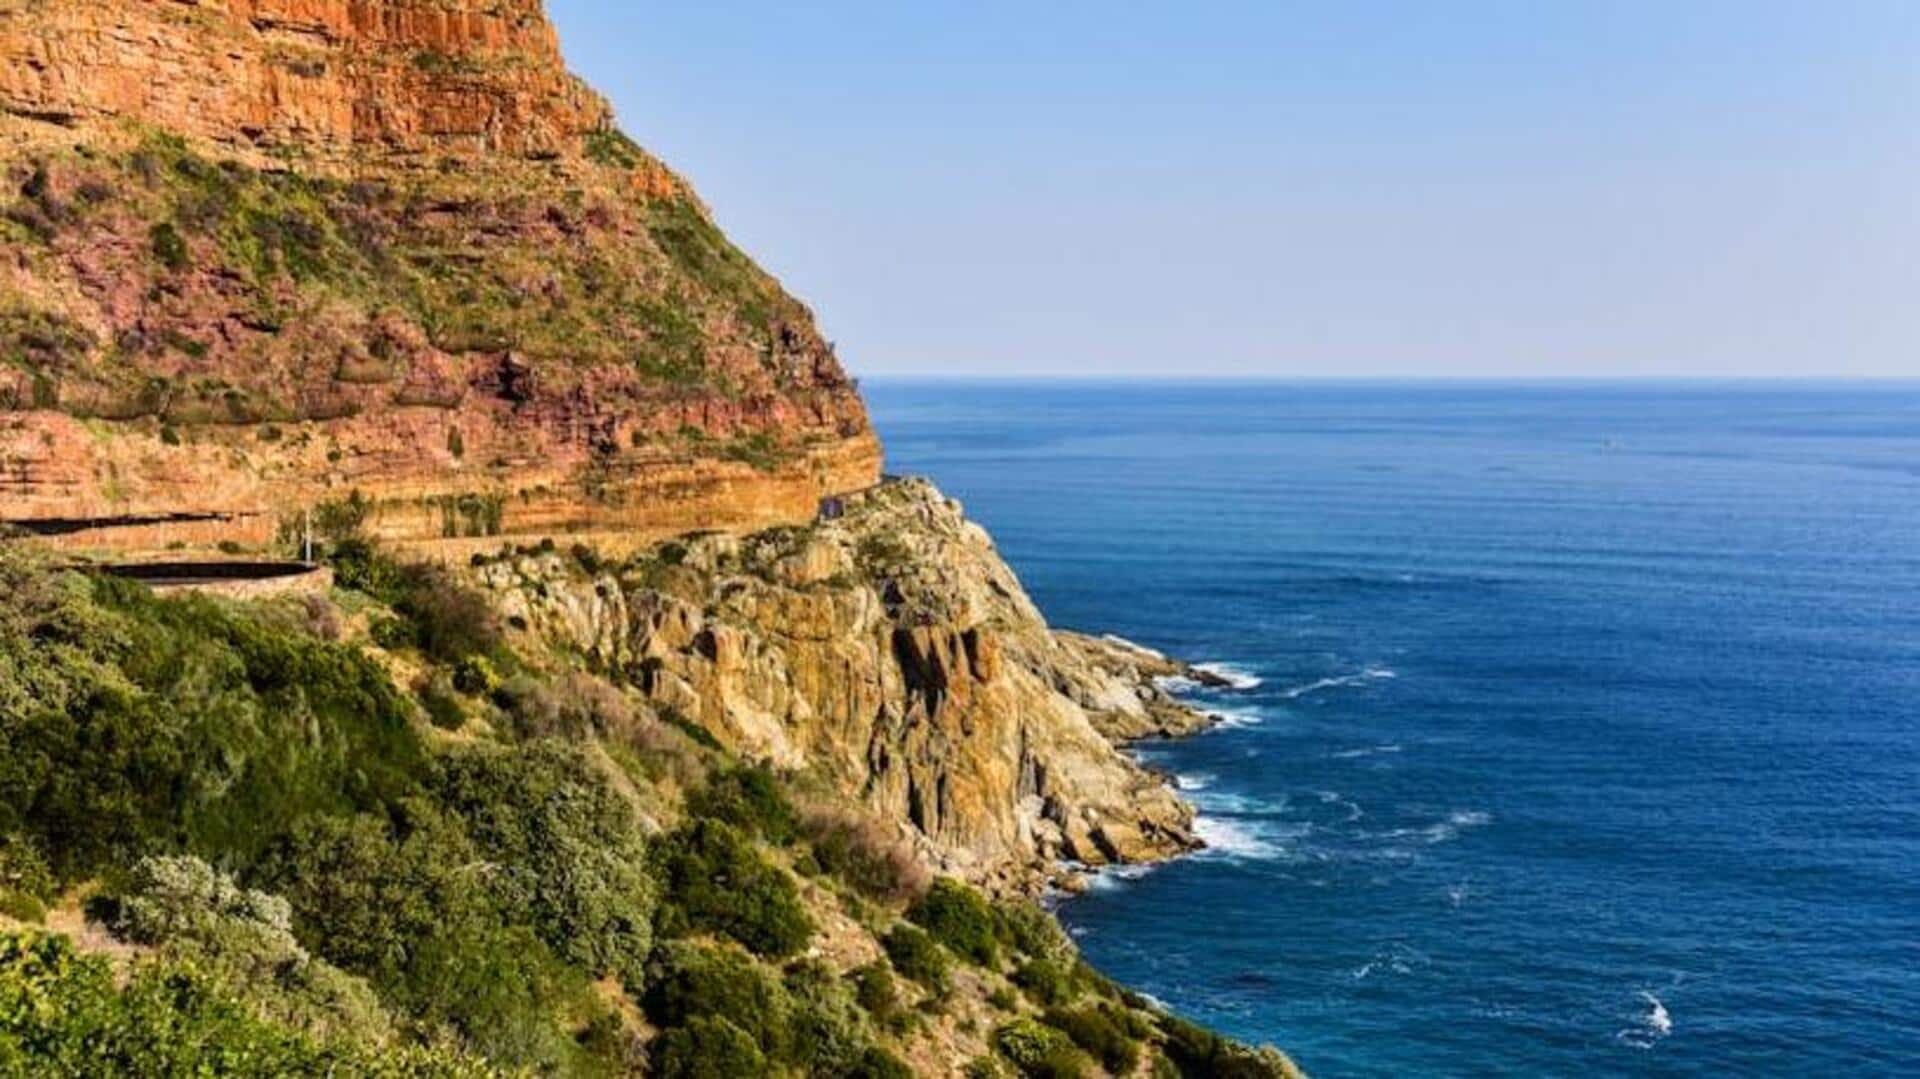 The lesser-known scenic coastal gems of Cape Town